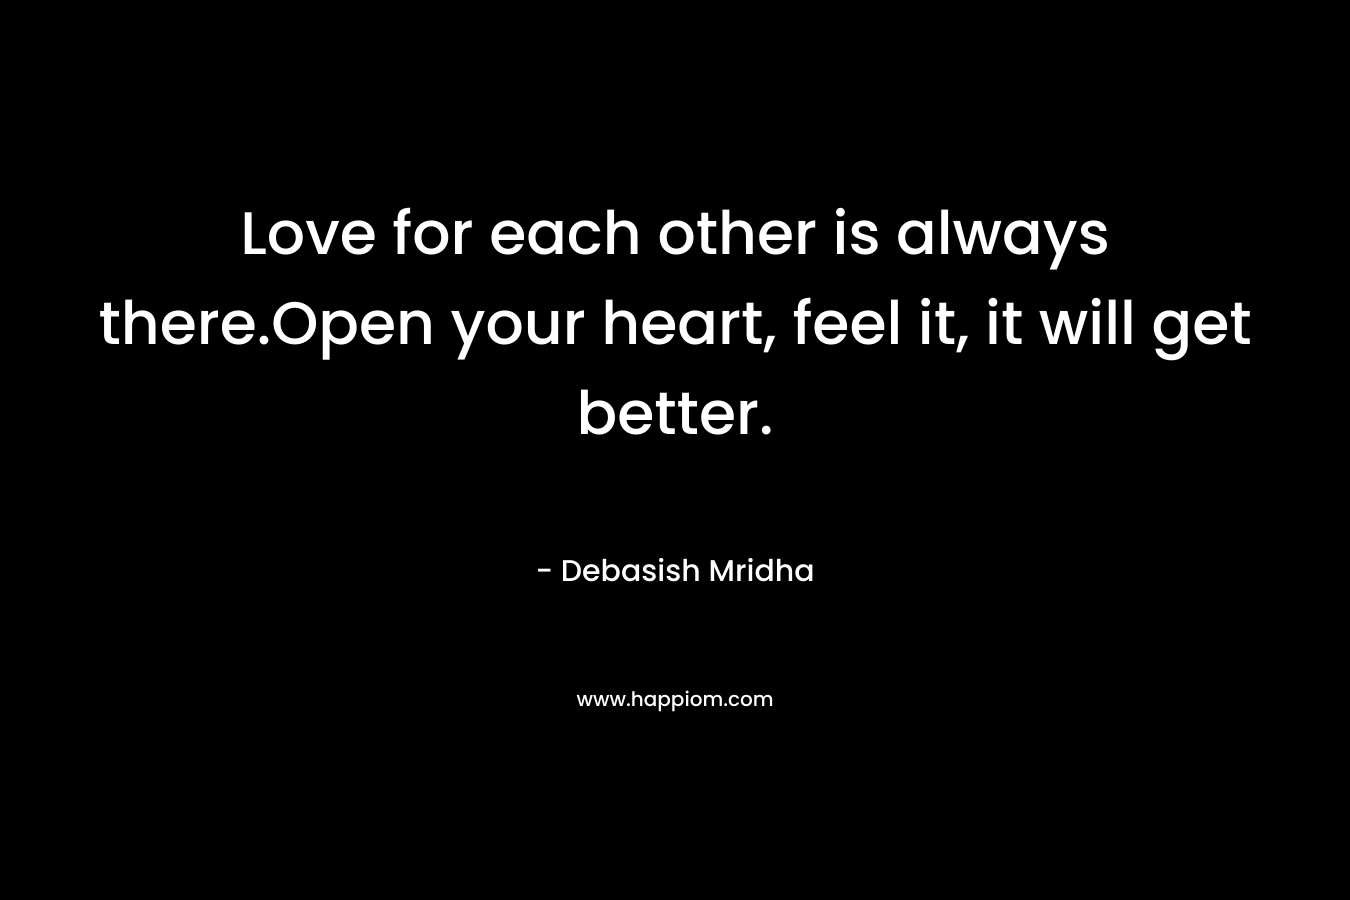 Love for each other is always there.Open your heart, feel it, it will get better.